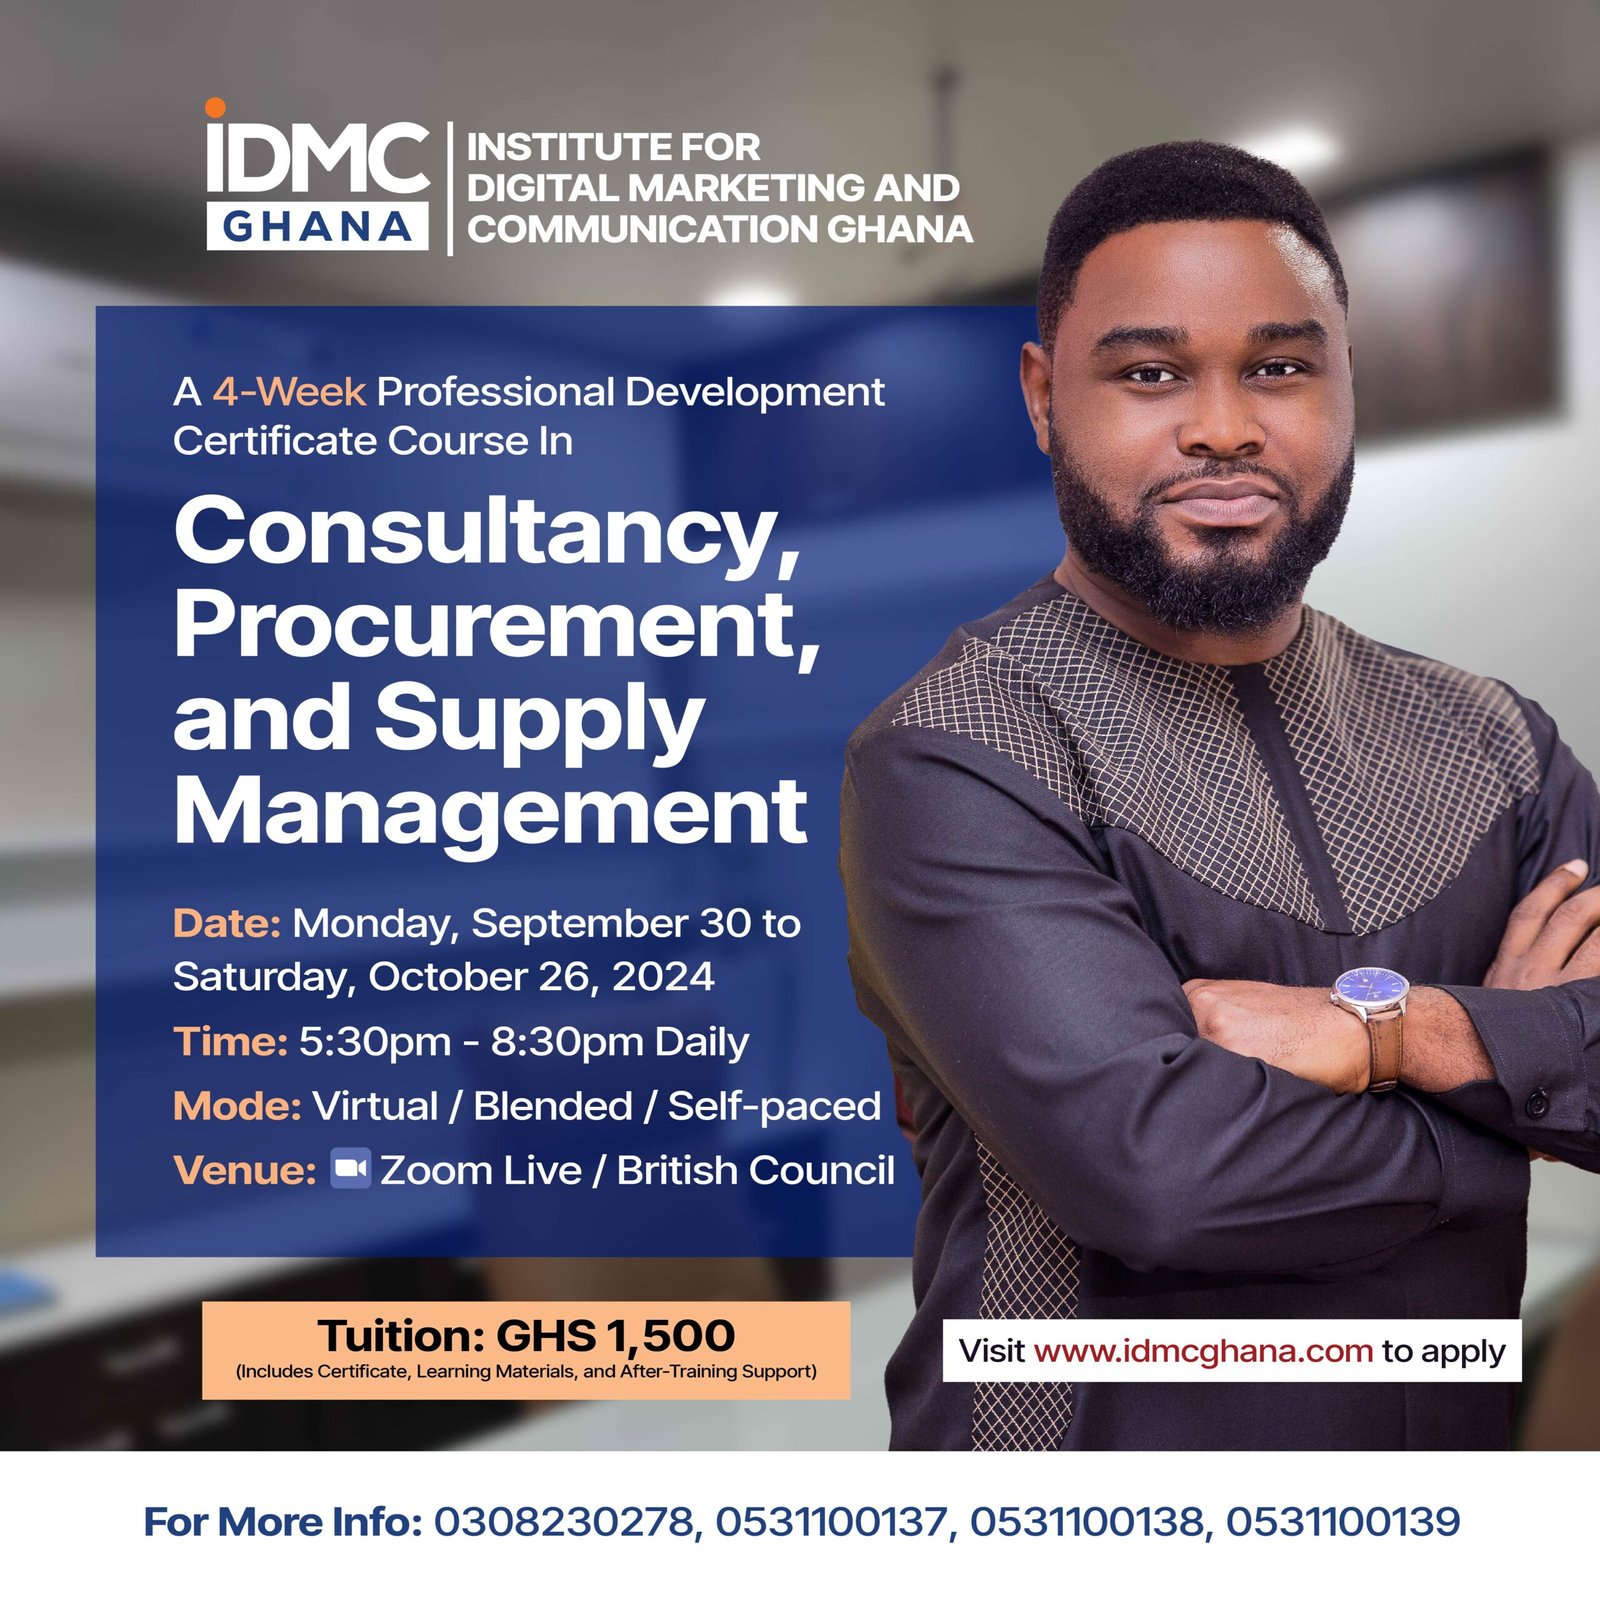 Consultancy, Procurement, and Supply Management